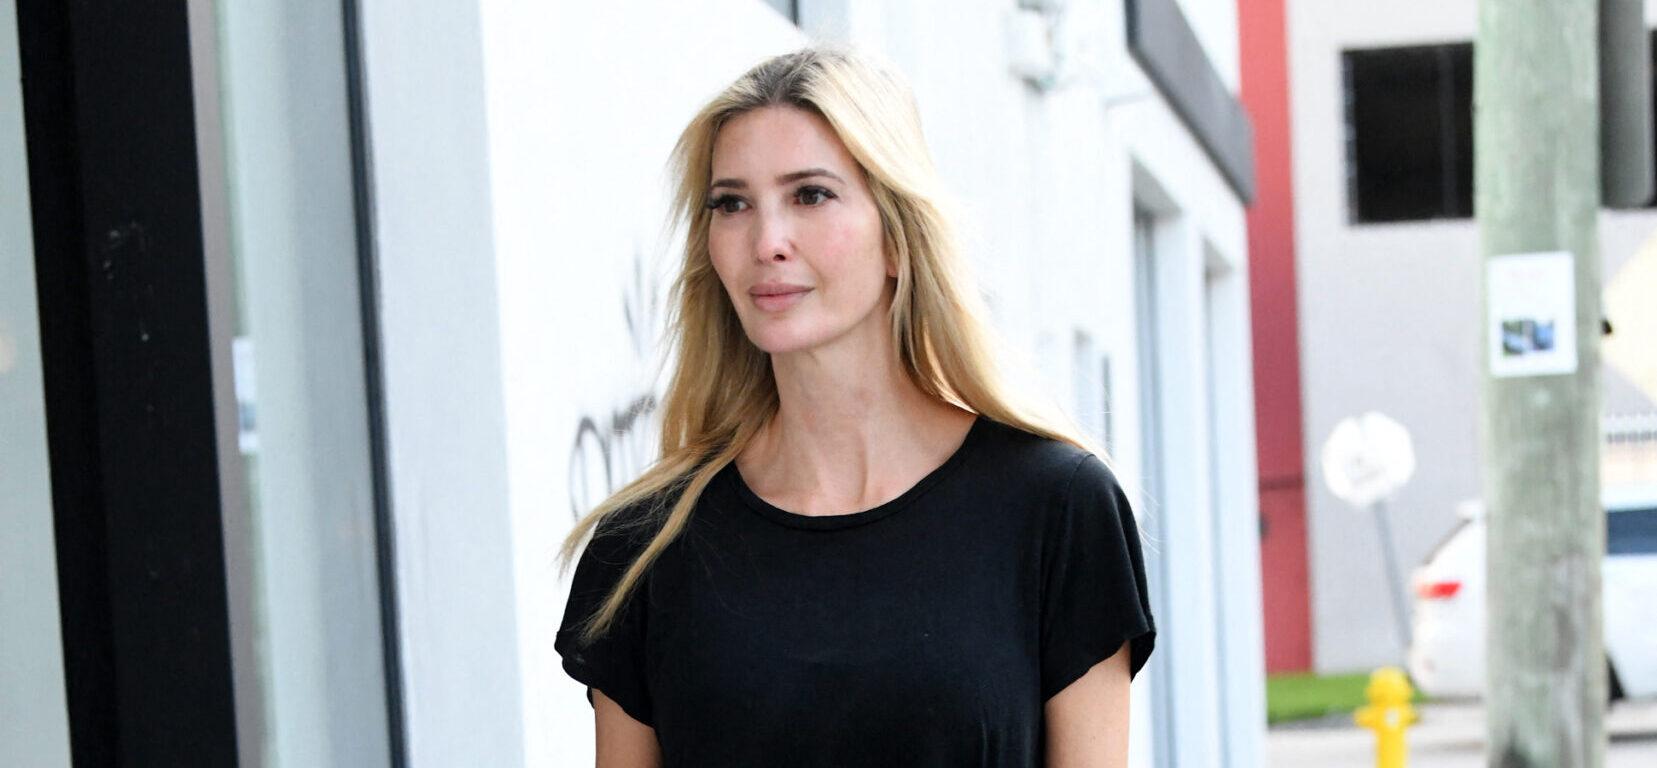 Ivanka Trump Flaunts Figure In Fitted Floral Dress Days After Partying With Jeff Bezos